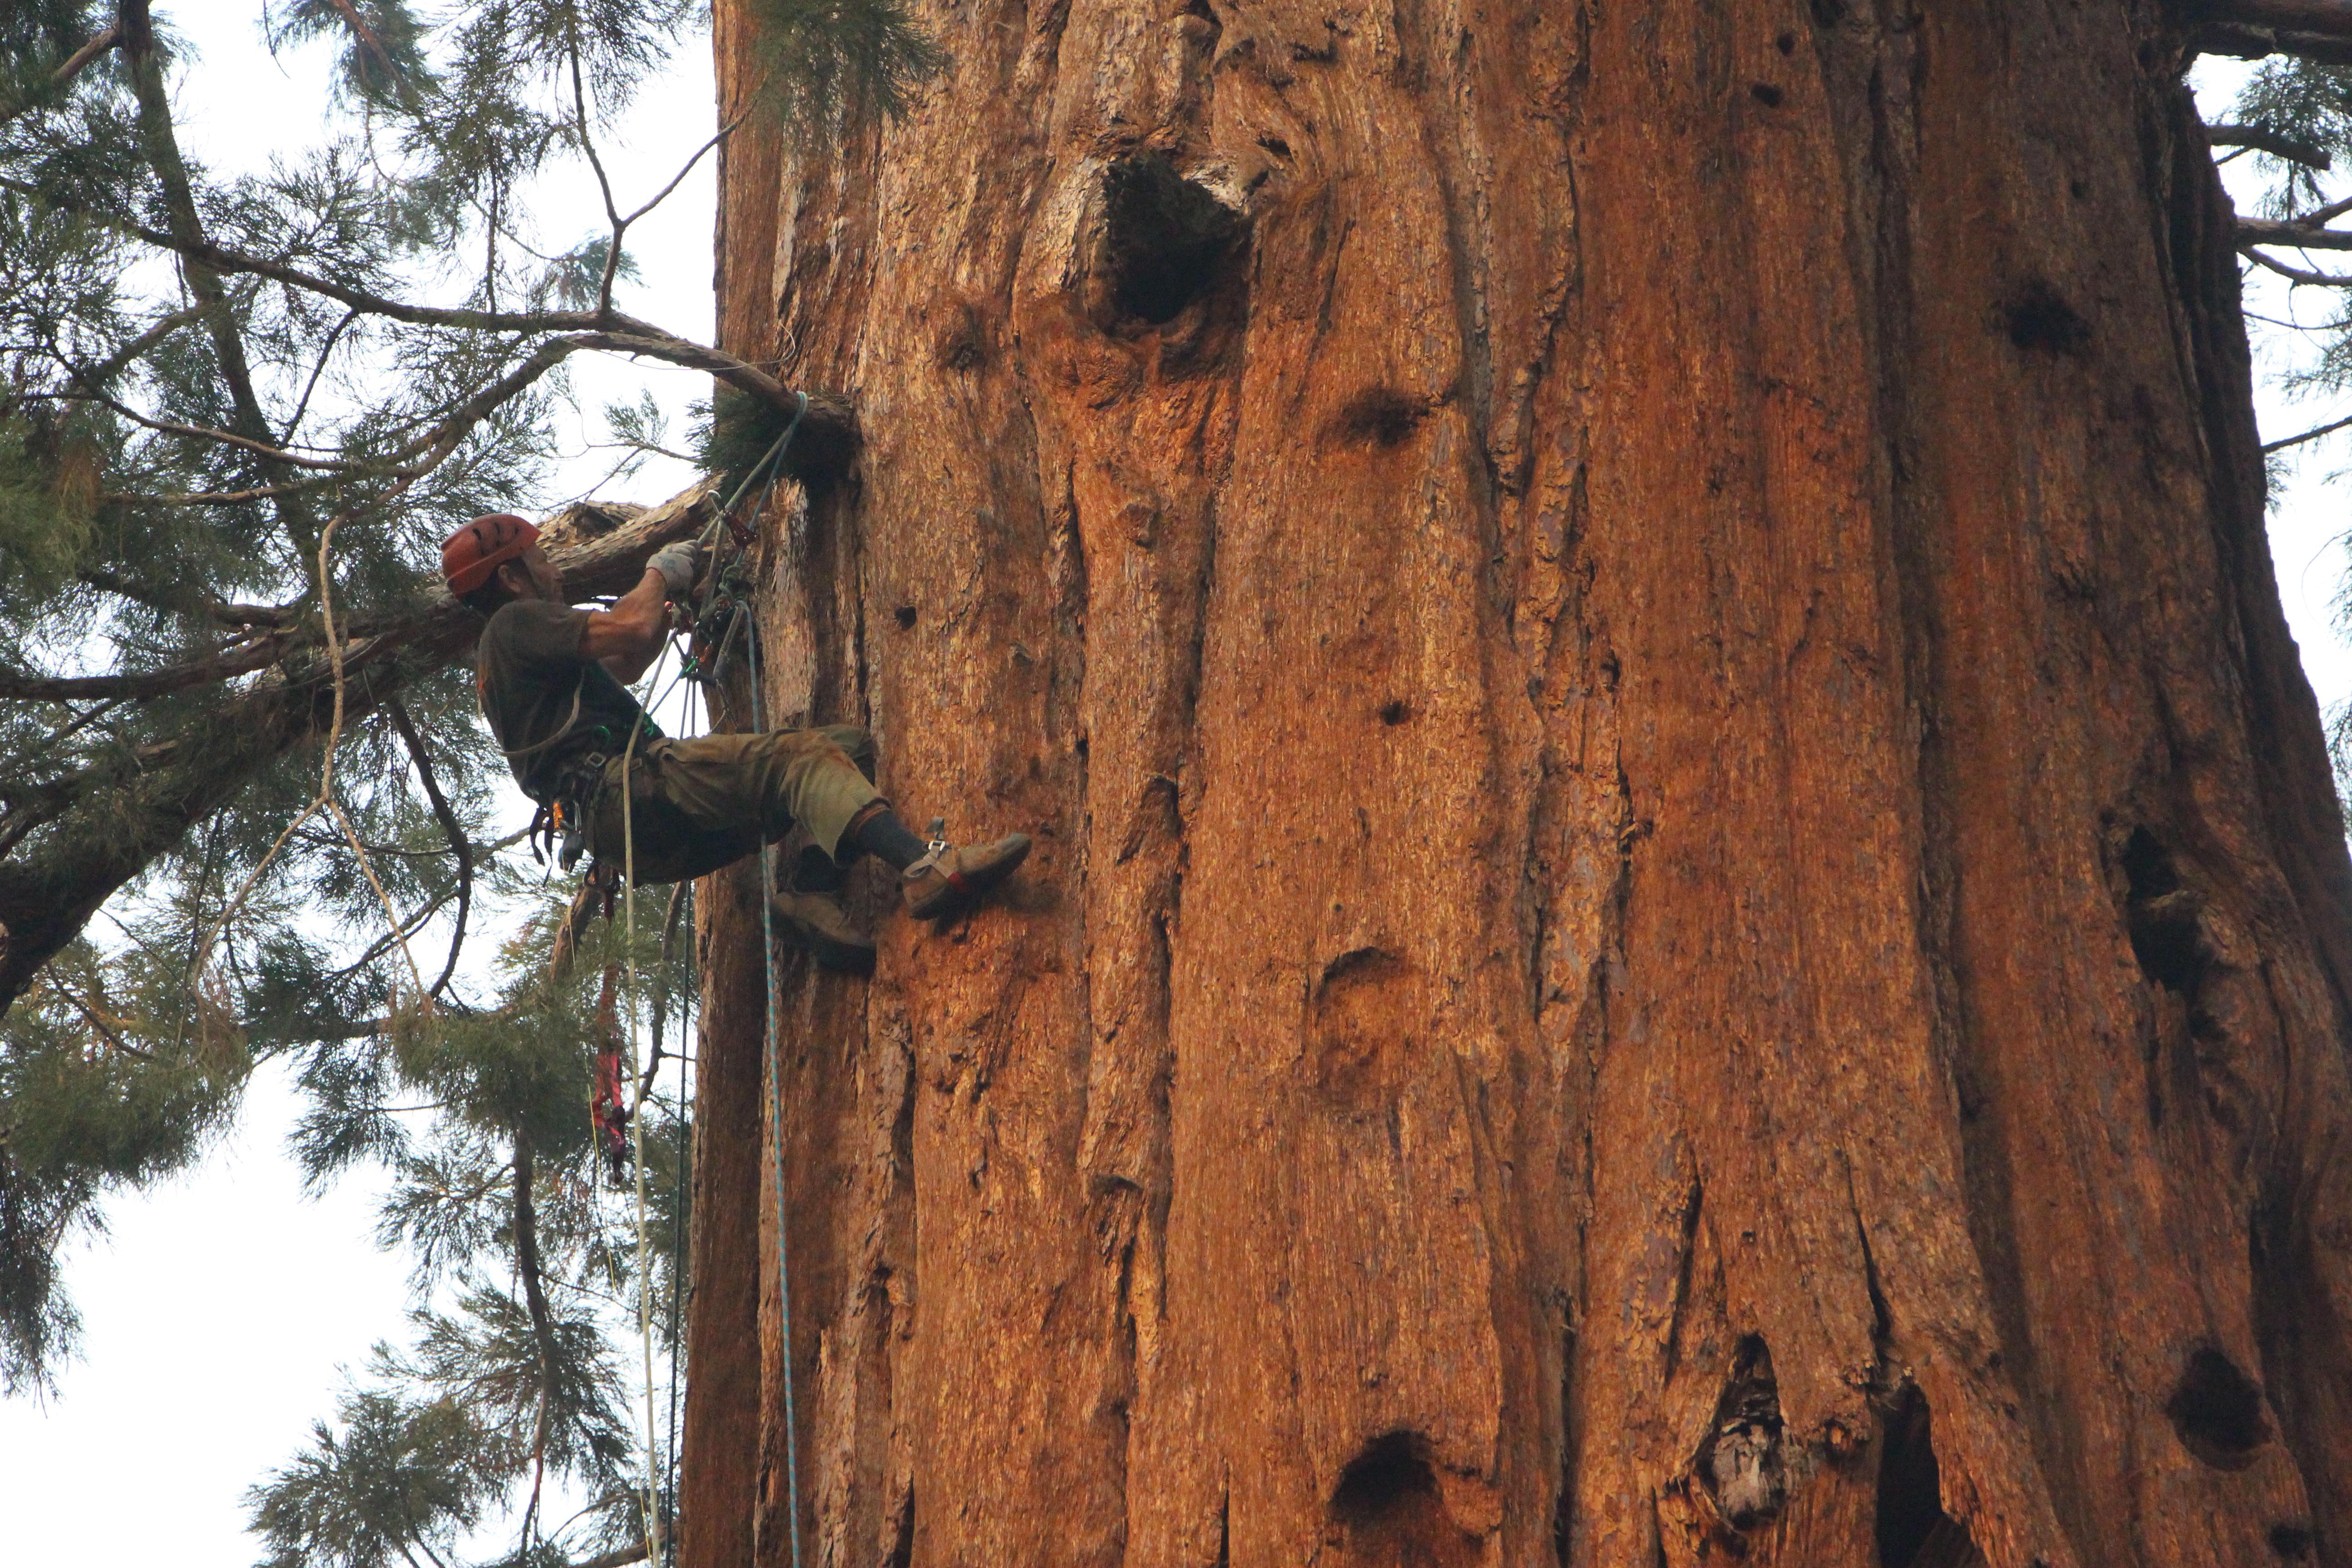 Photo of smokejumpers scouting and climbing giant Sequoia trees.